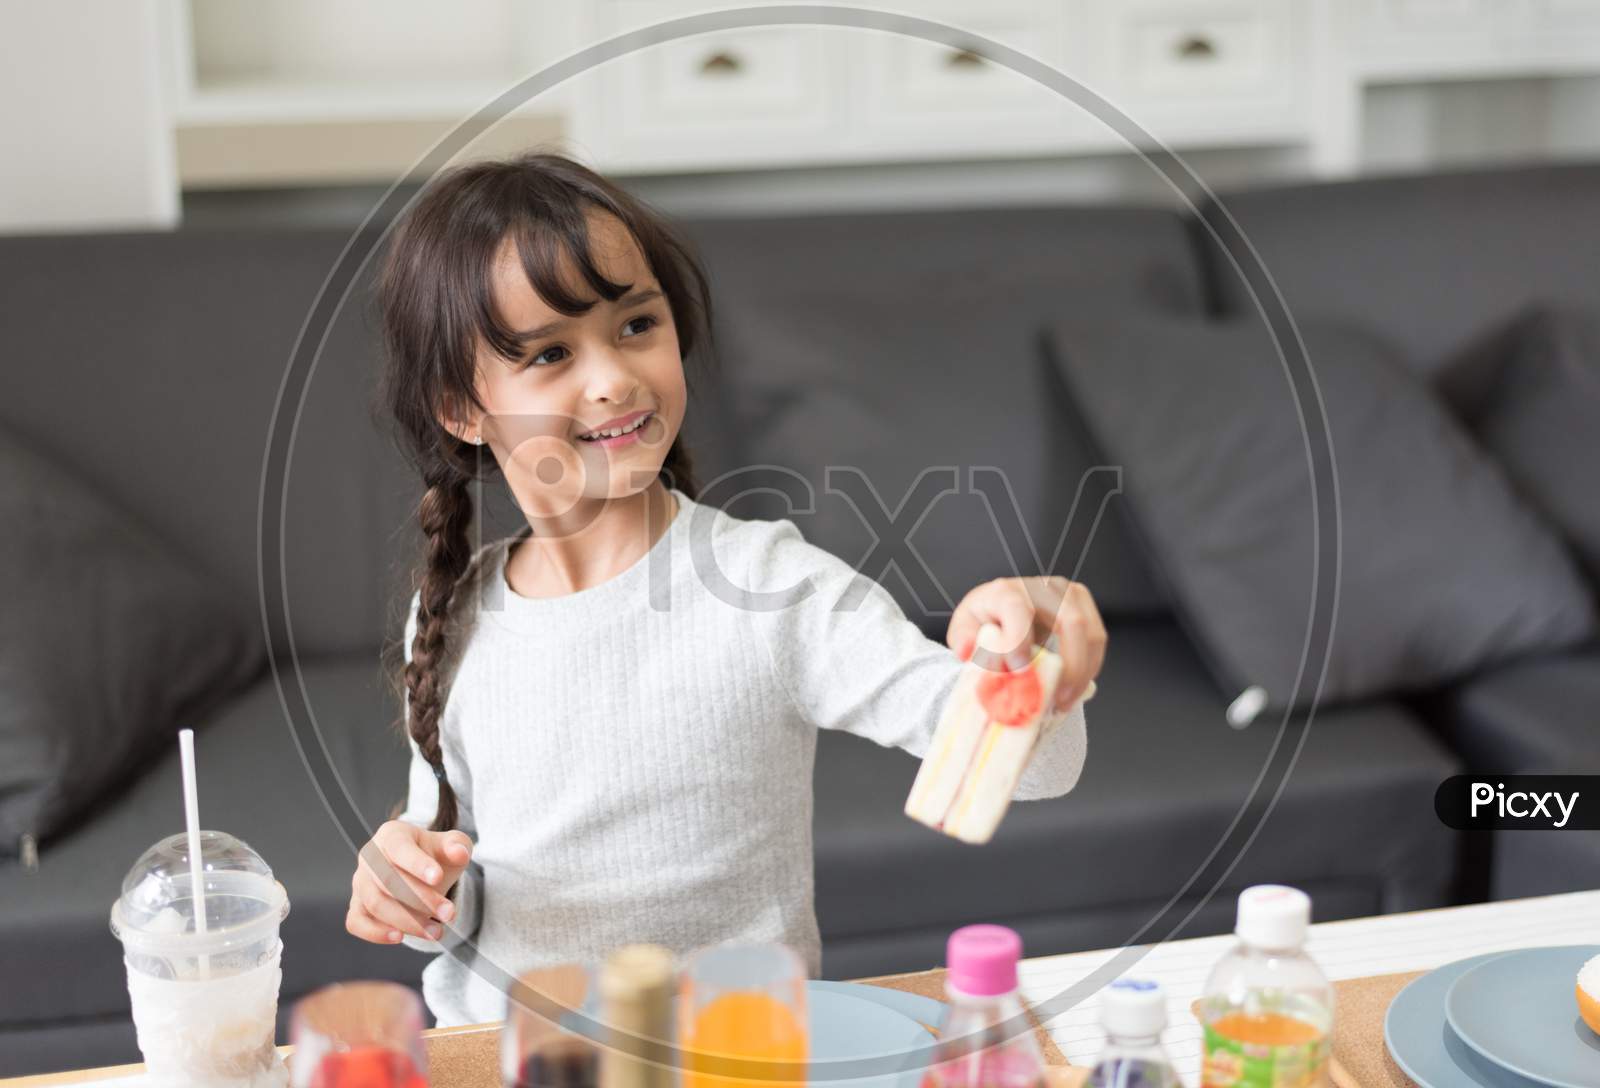 Happy Little Girl Giving Sandwich Cooking Toy As Chef In Living Room. Playful Of Child And Happiness Education And Development Concept. Learning And Leisure Of Cute Girl. Nursery And Daycare Theme.